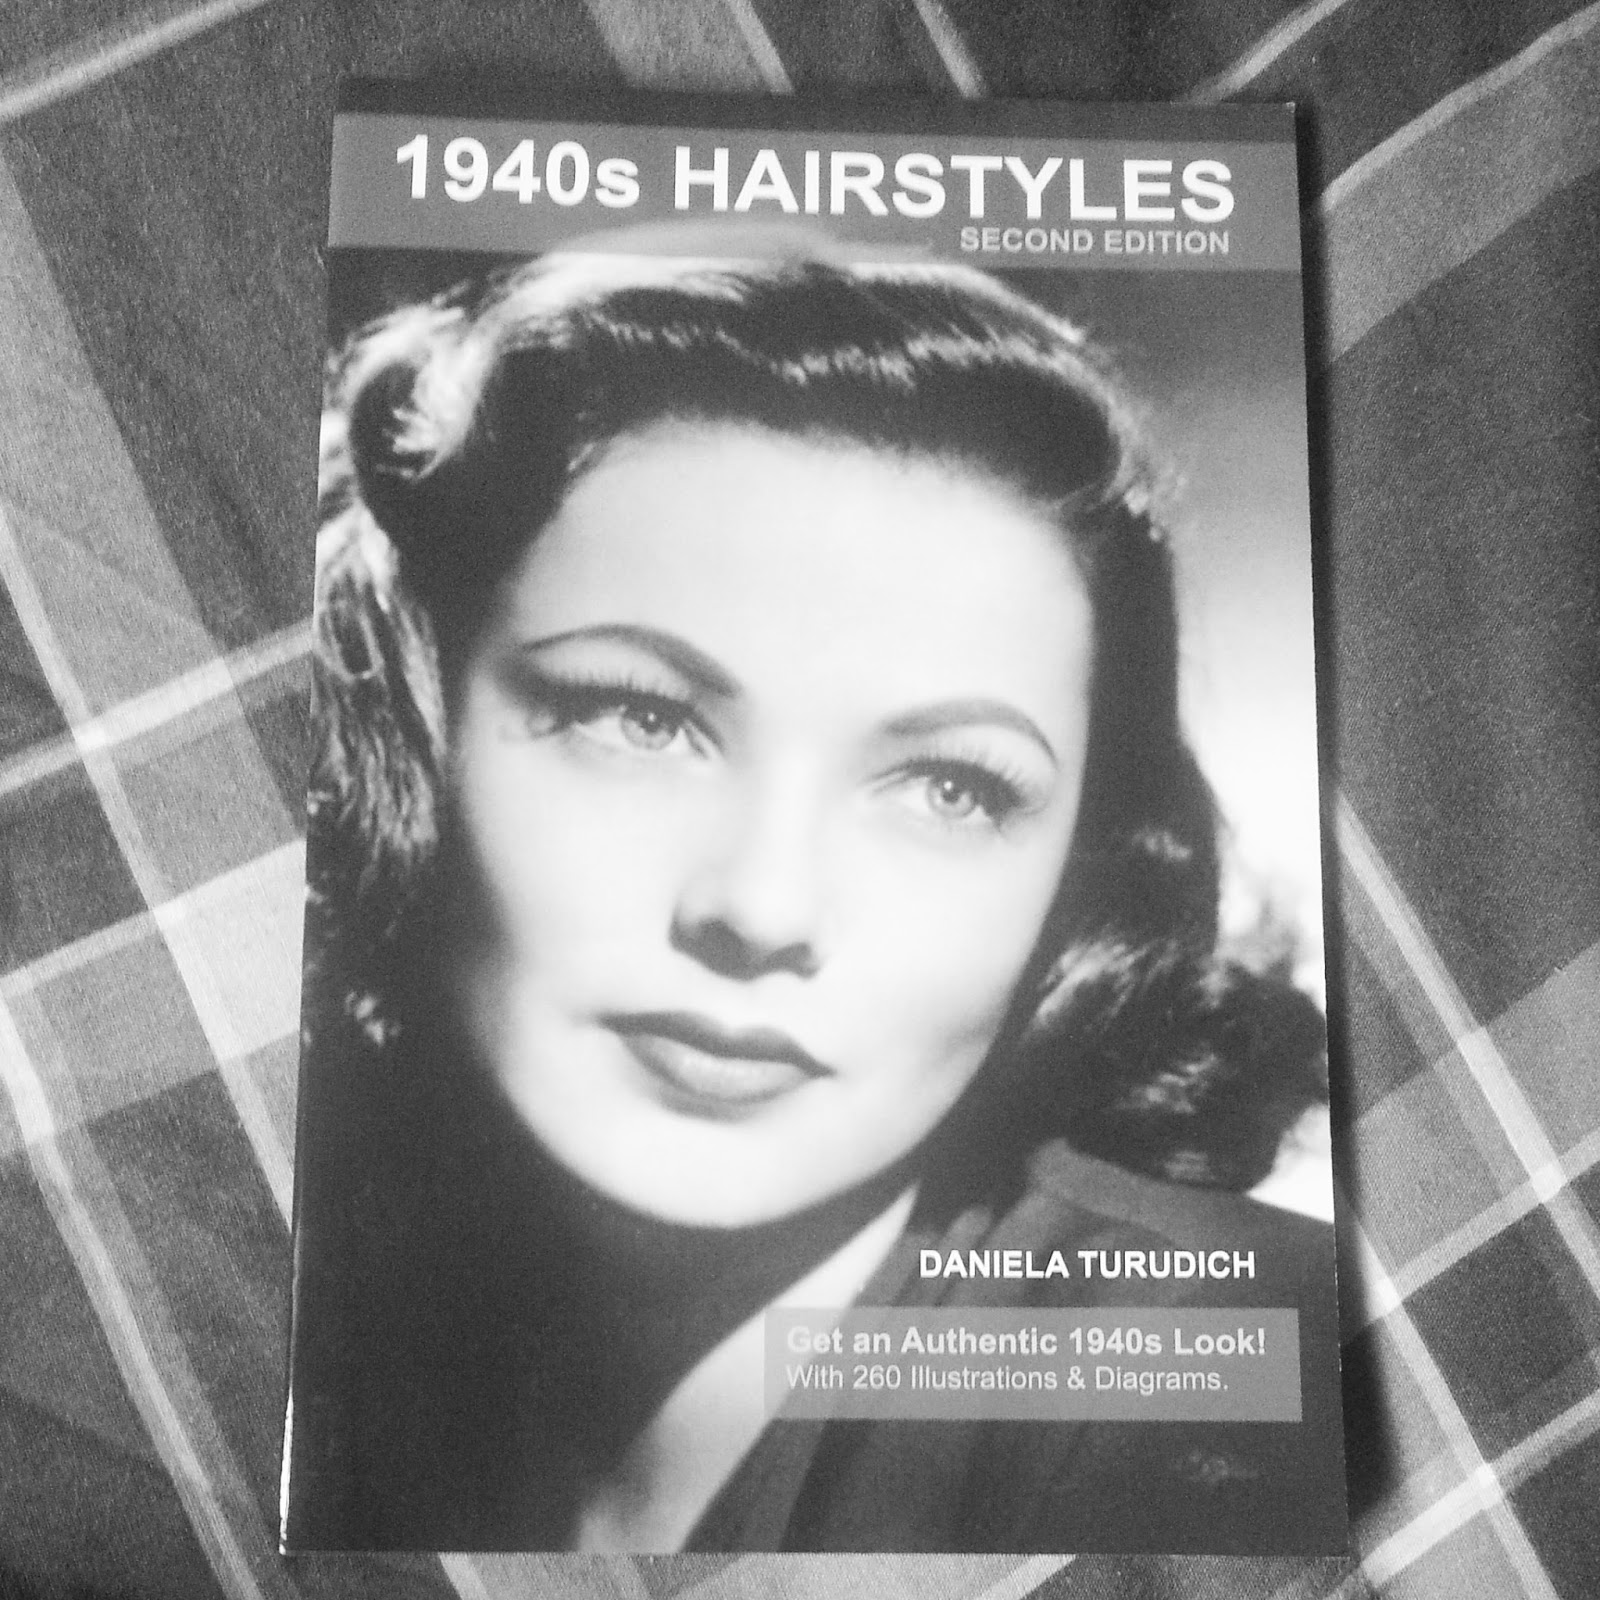 A Brighton Belle 194039s Hairstyles A Book Review